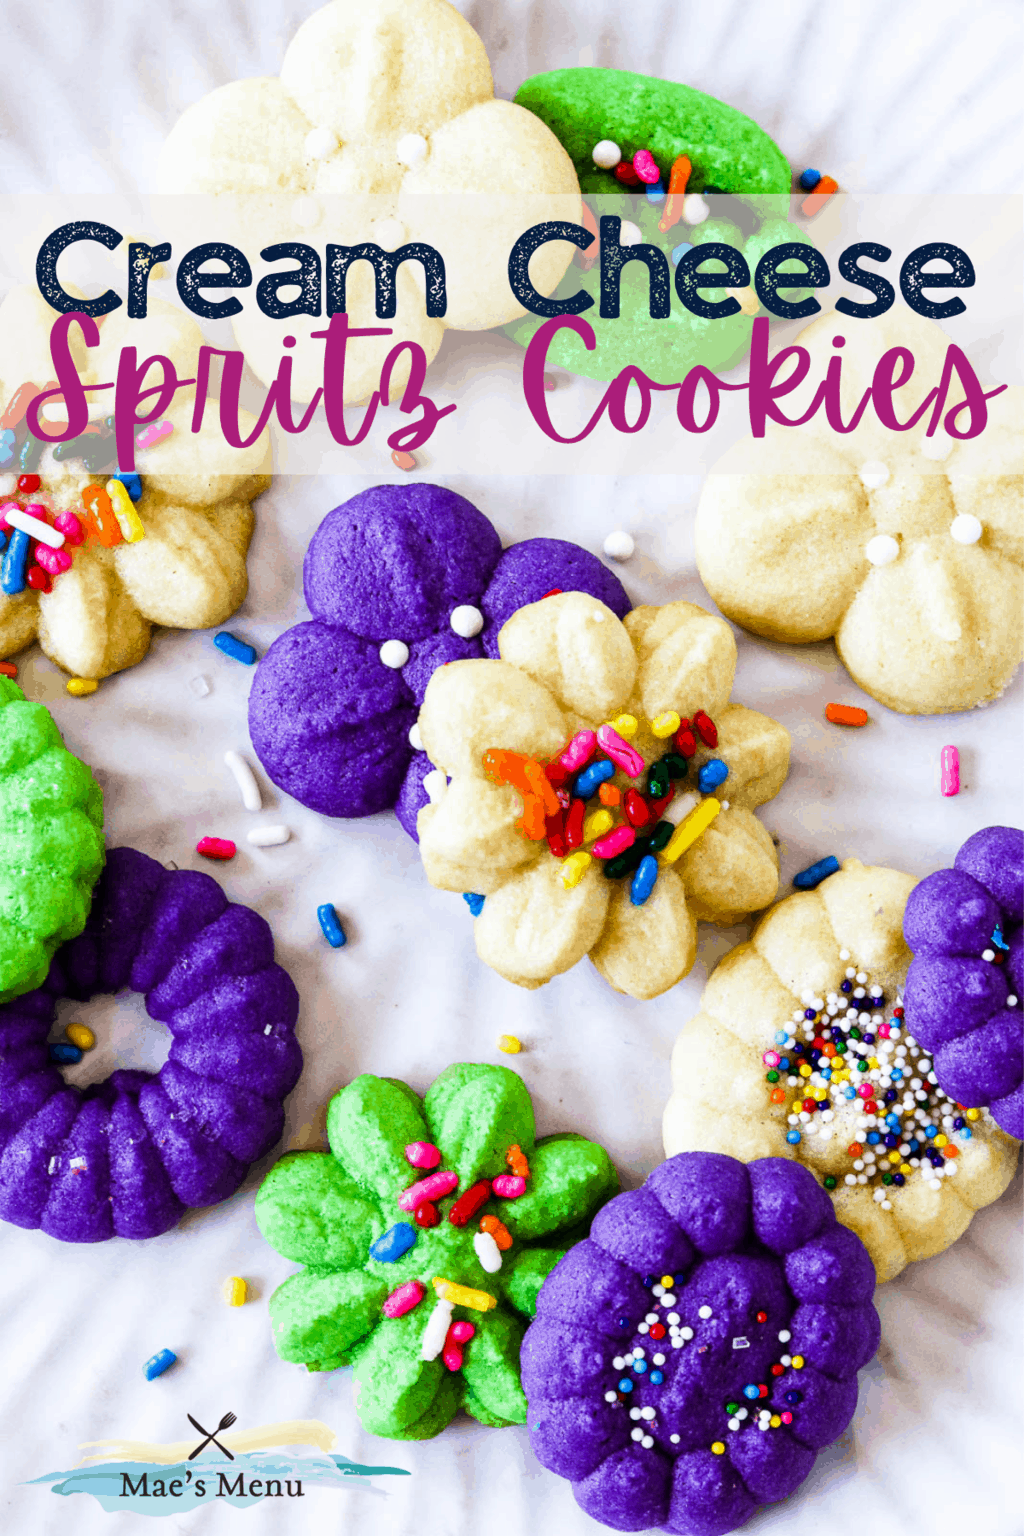 A pinterest pin for cream cheese spritz cookies with an up-close overhead shot of the cookies on a white dish